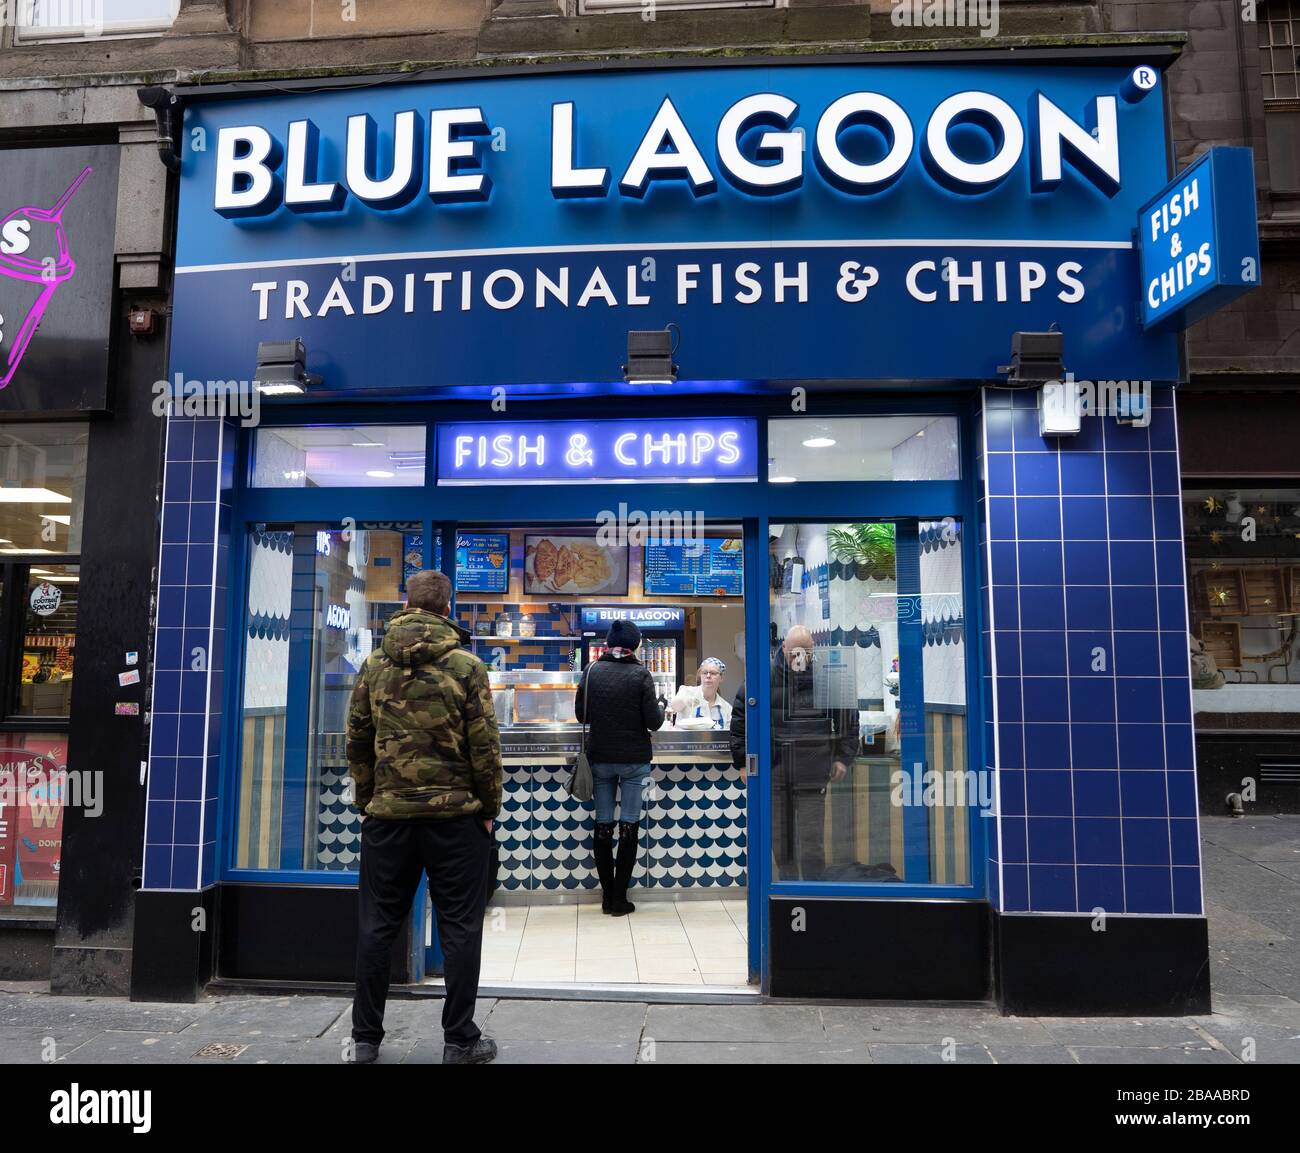 Glasgow, Scotland, UK. 26 March, 2020. Views from city centre in Glasgow on Thursday during the third day of the Government sanctioned Covid-19 lockdown. The city is largely deserted. Only food and convenience stores open. Pictured; Blue Lagoon fish and chip shop stayed open. Iain Masterton/Alamy Live News Stock Photo